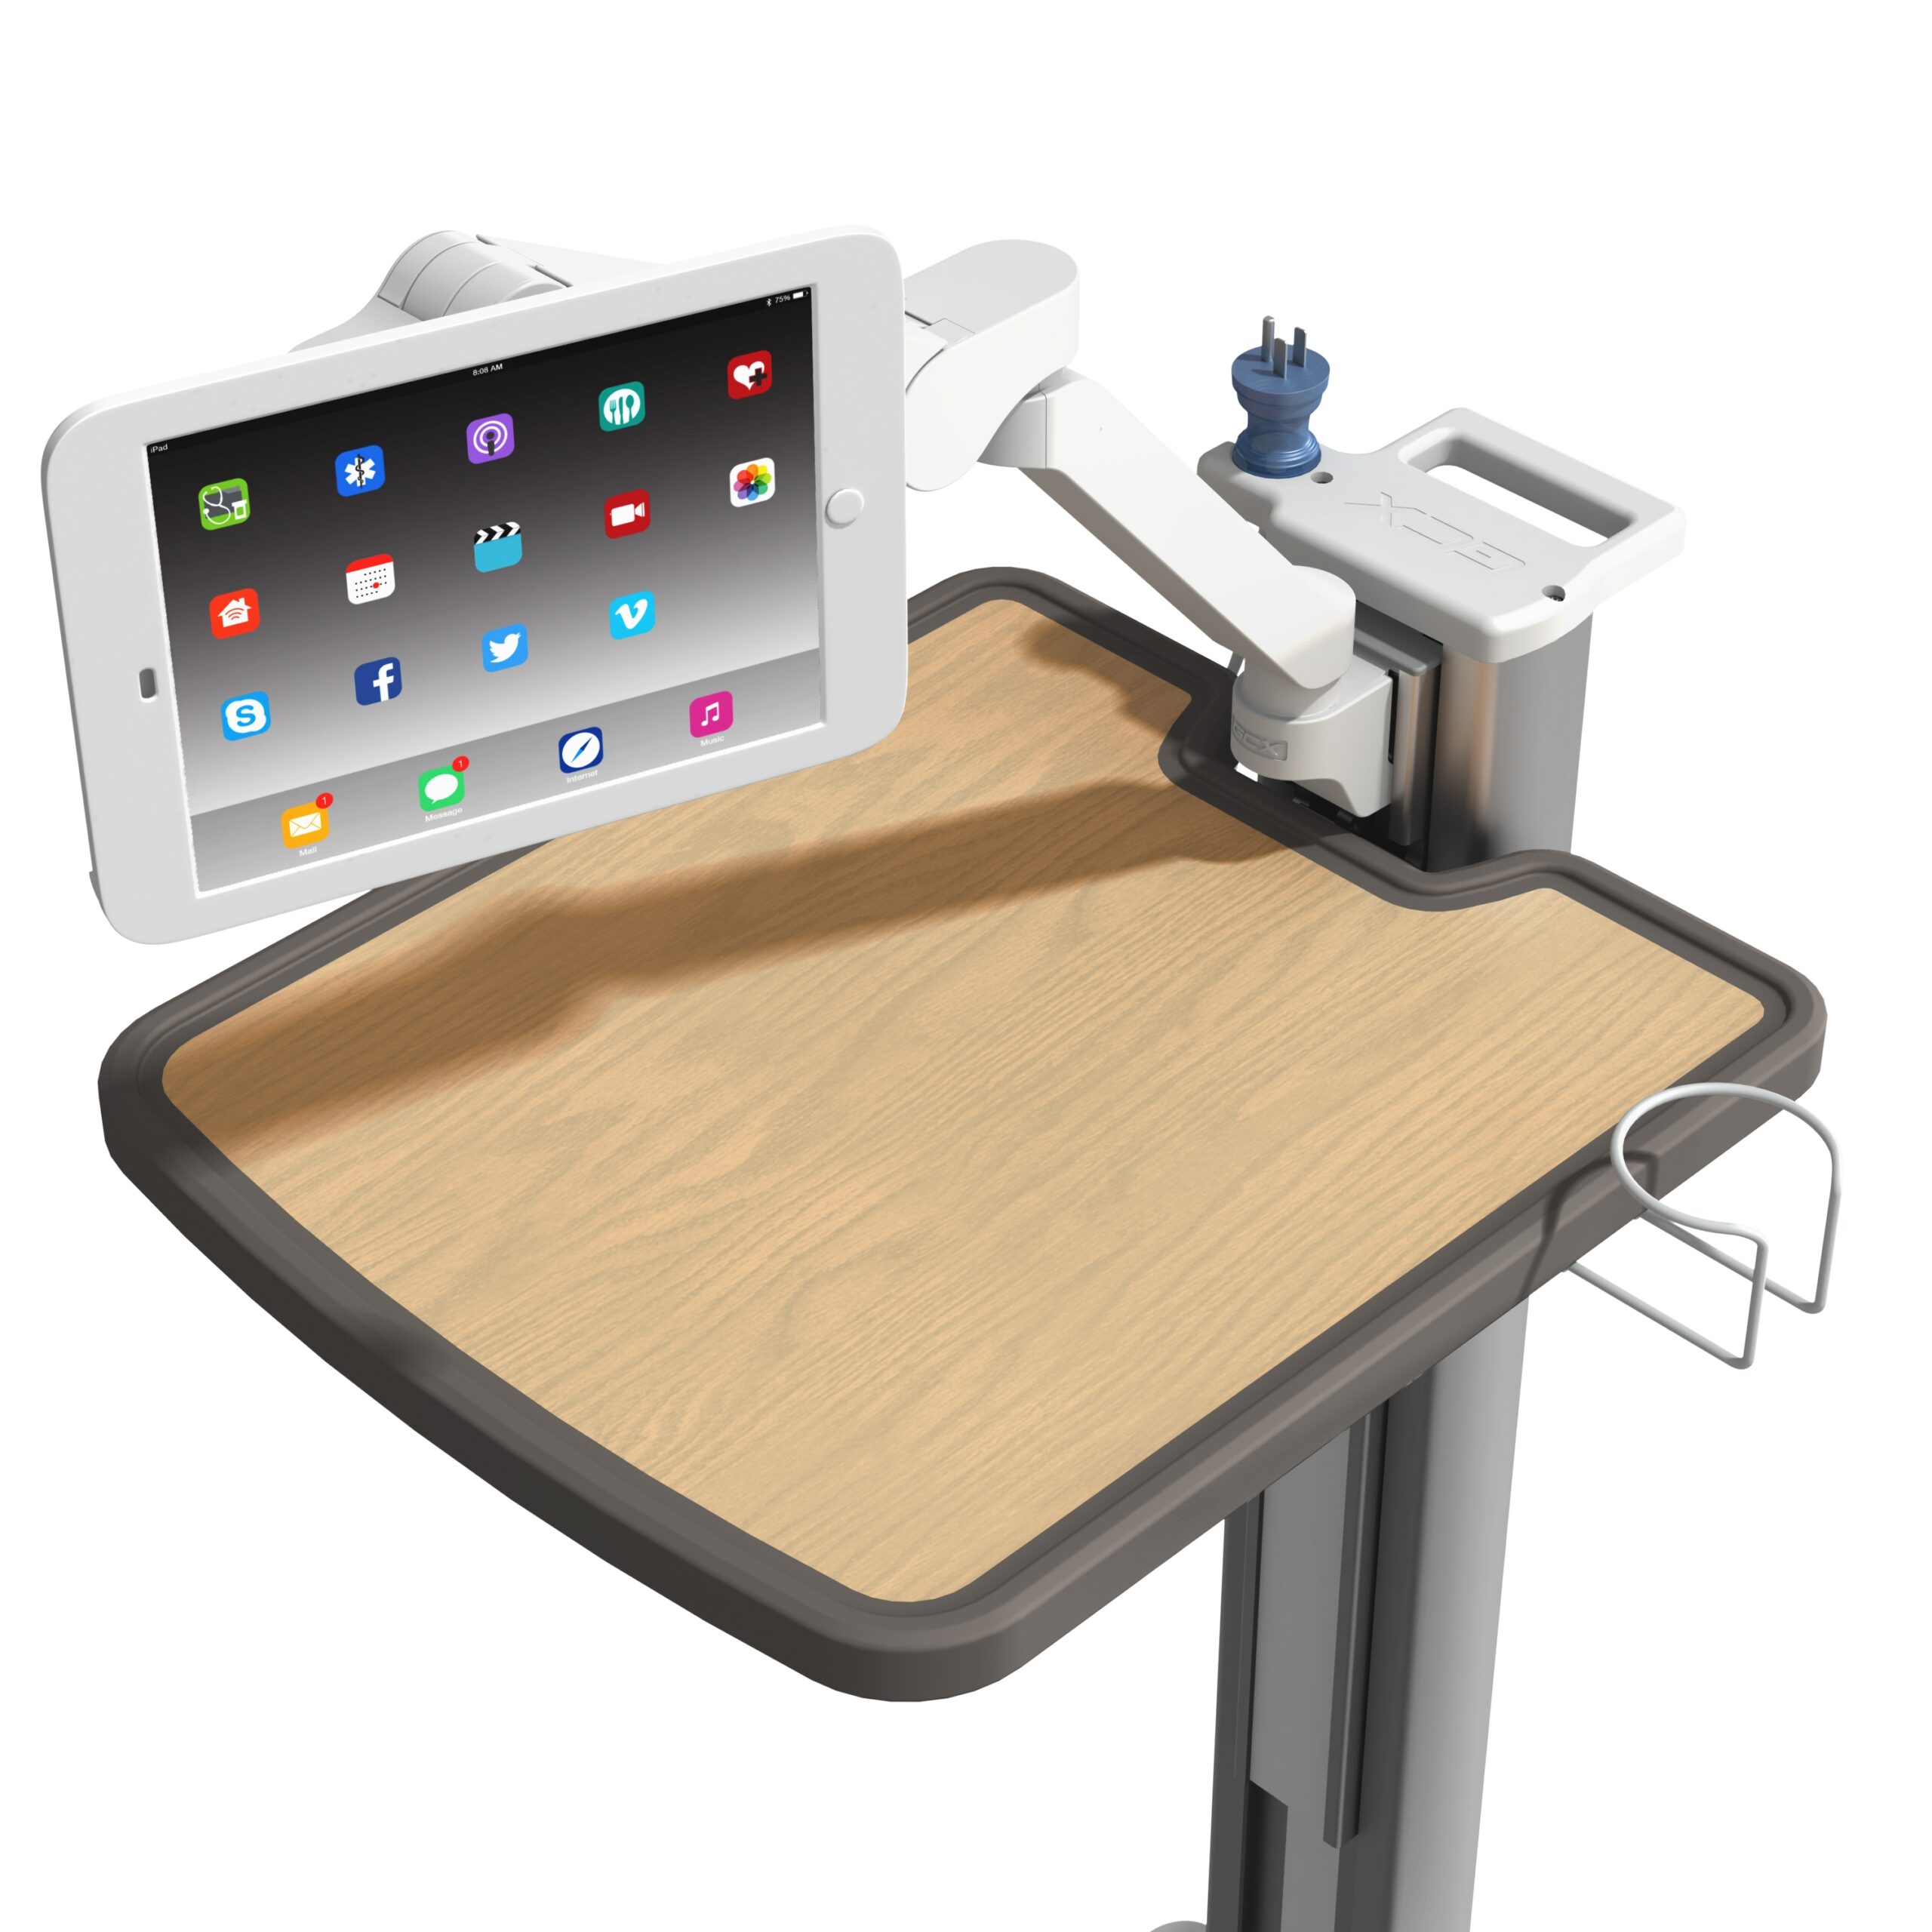 Cup Holder for Compact Patient Engagement Table